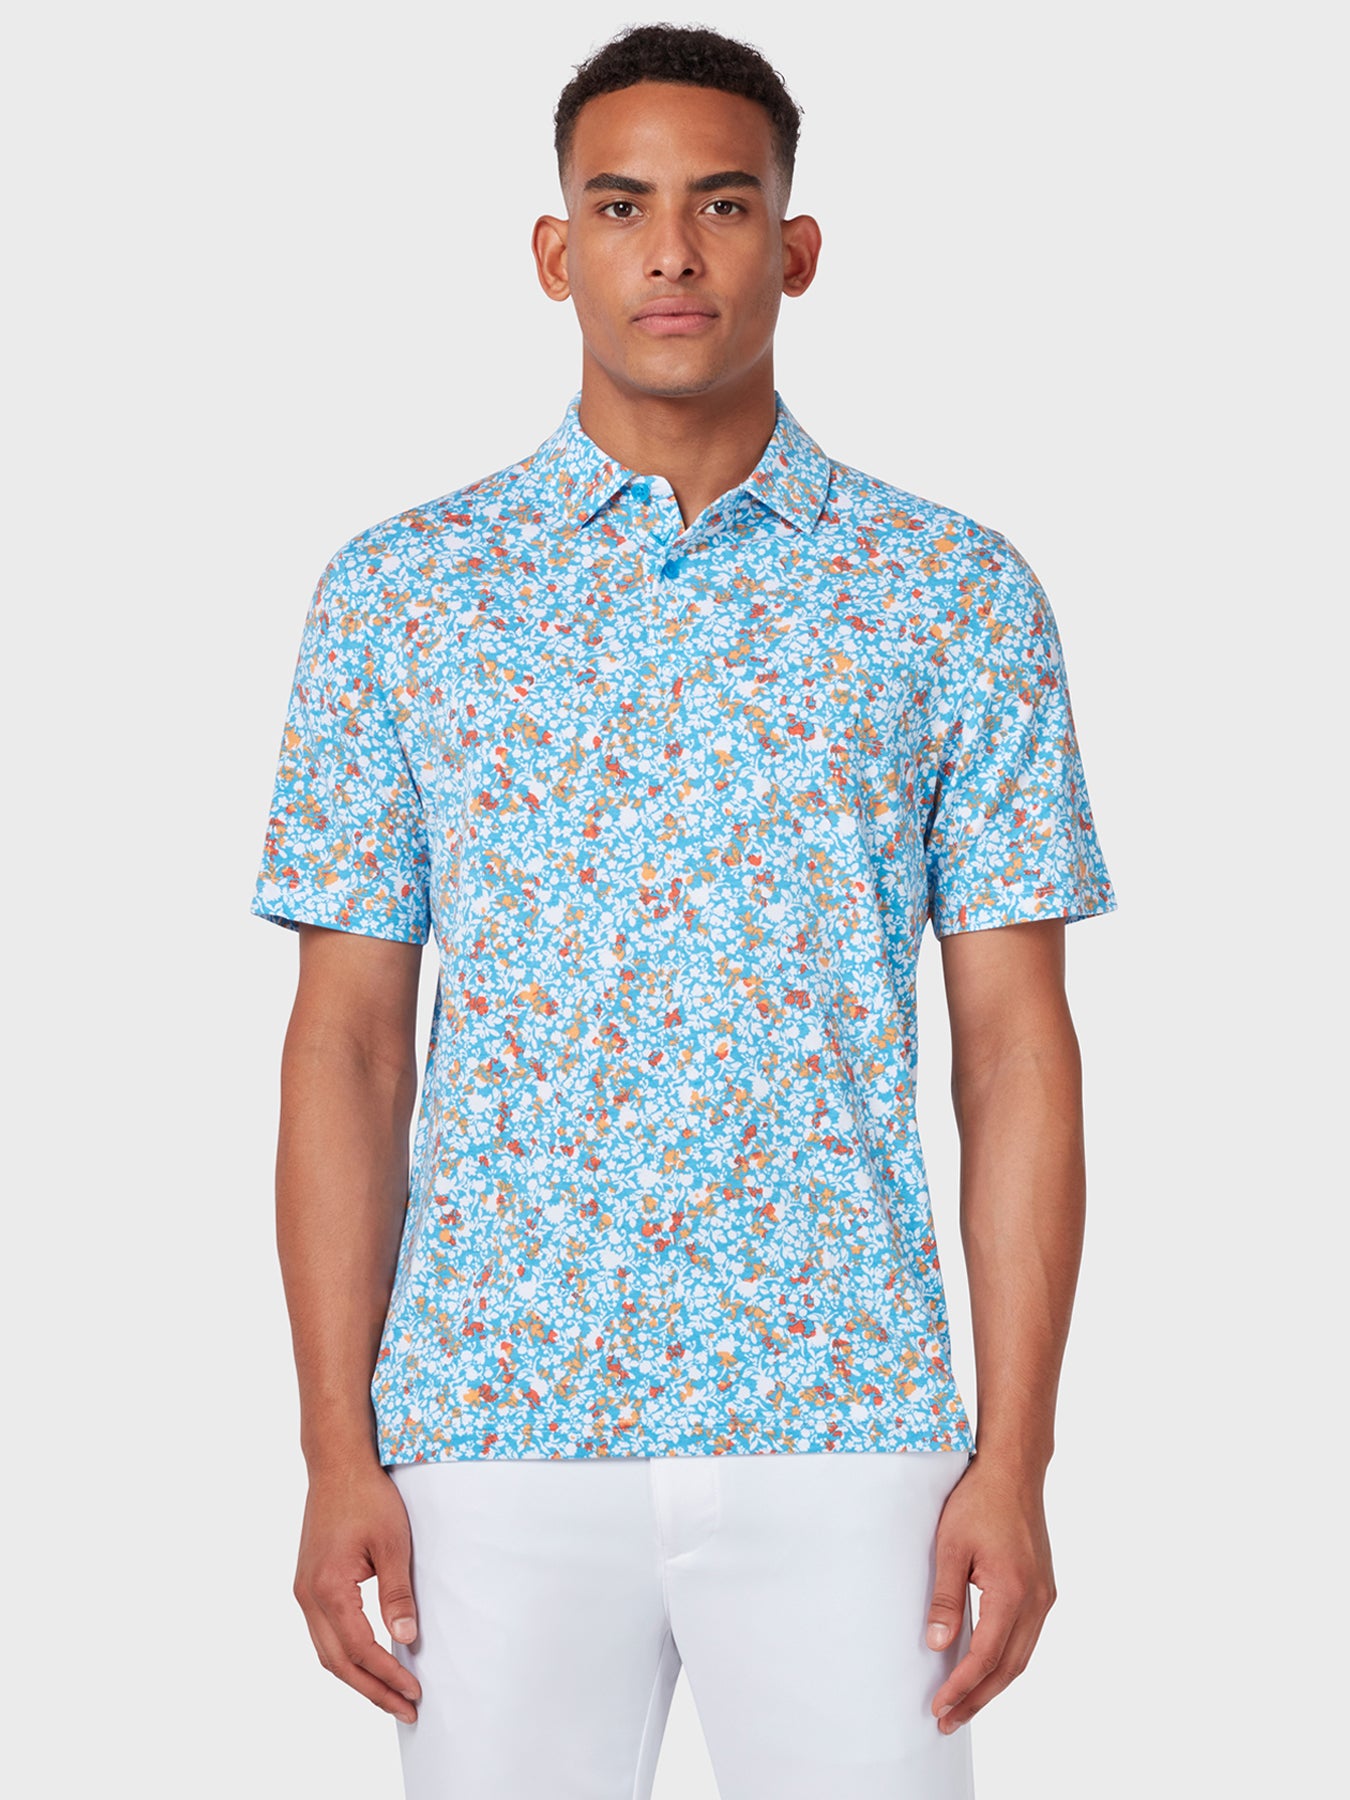 View Artificial Nature Polo In Malibu Blue information